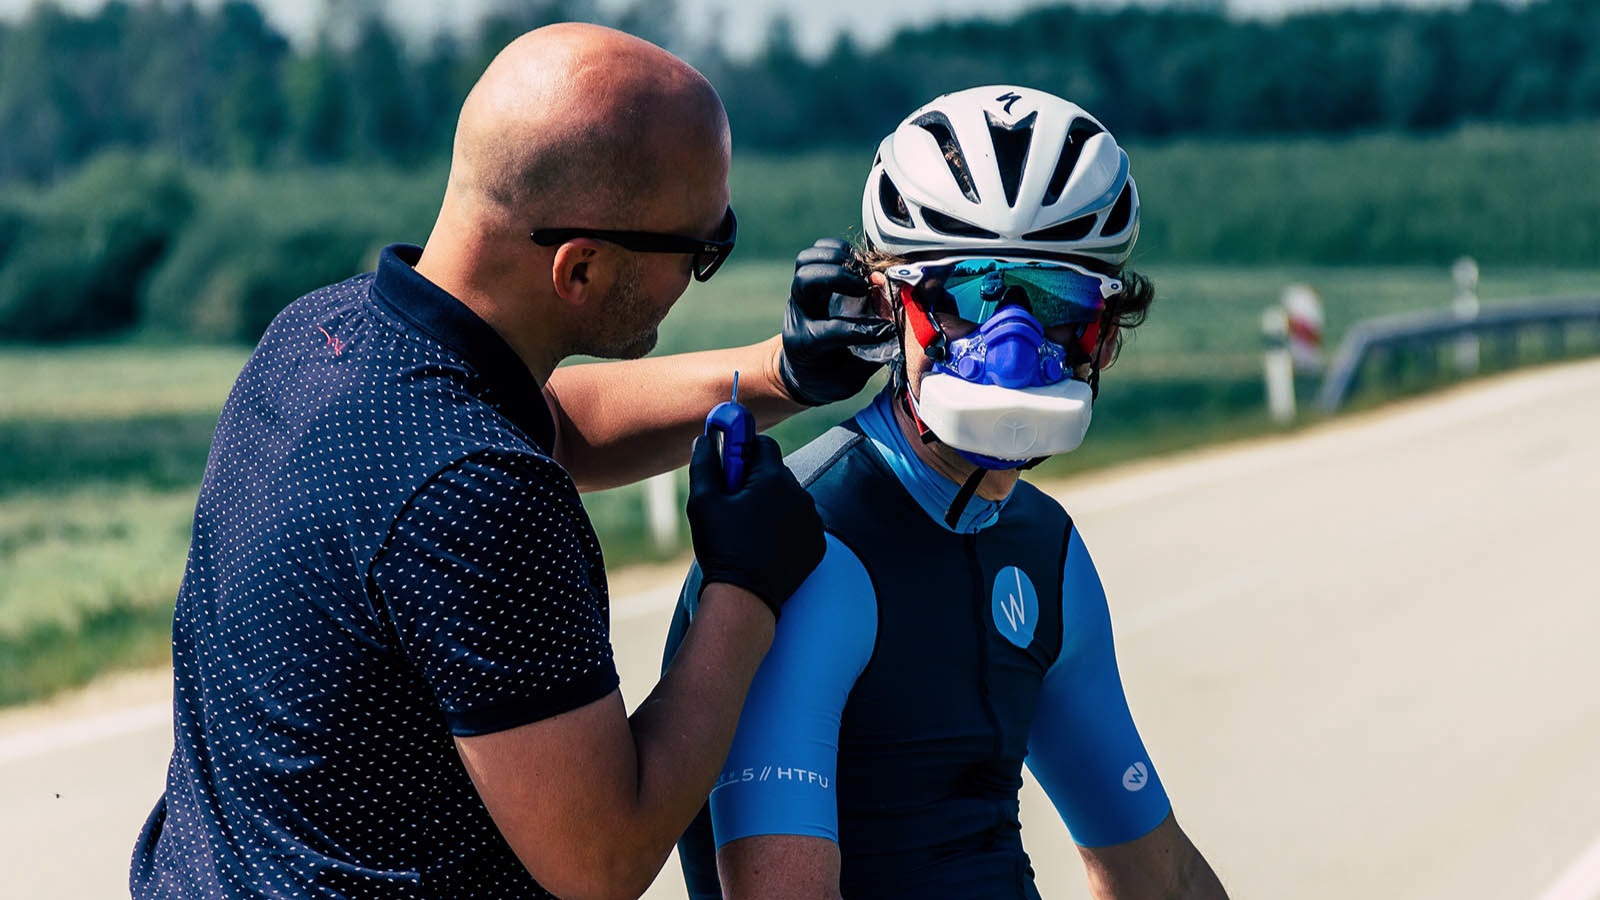 Field lactate test using Vo2 gas analysis // 2019